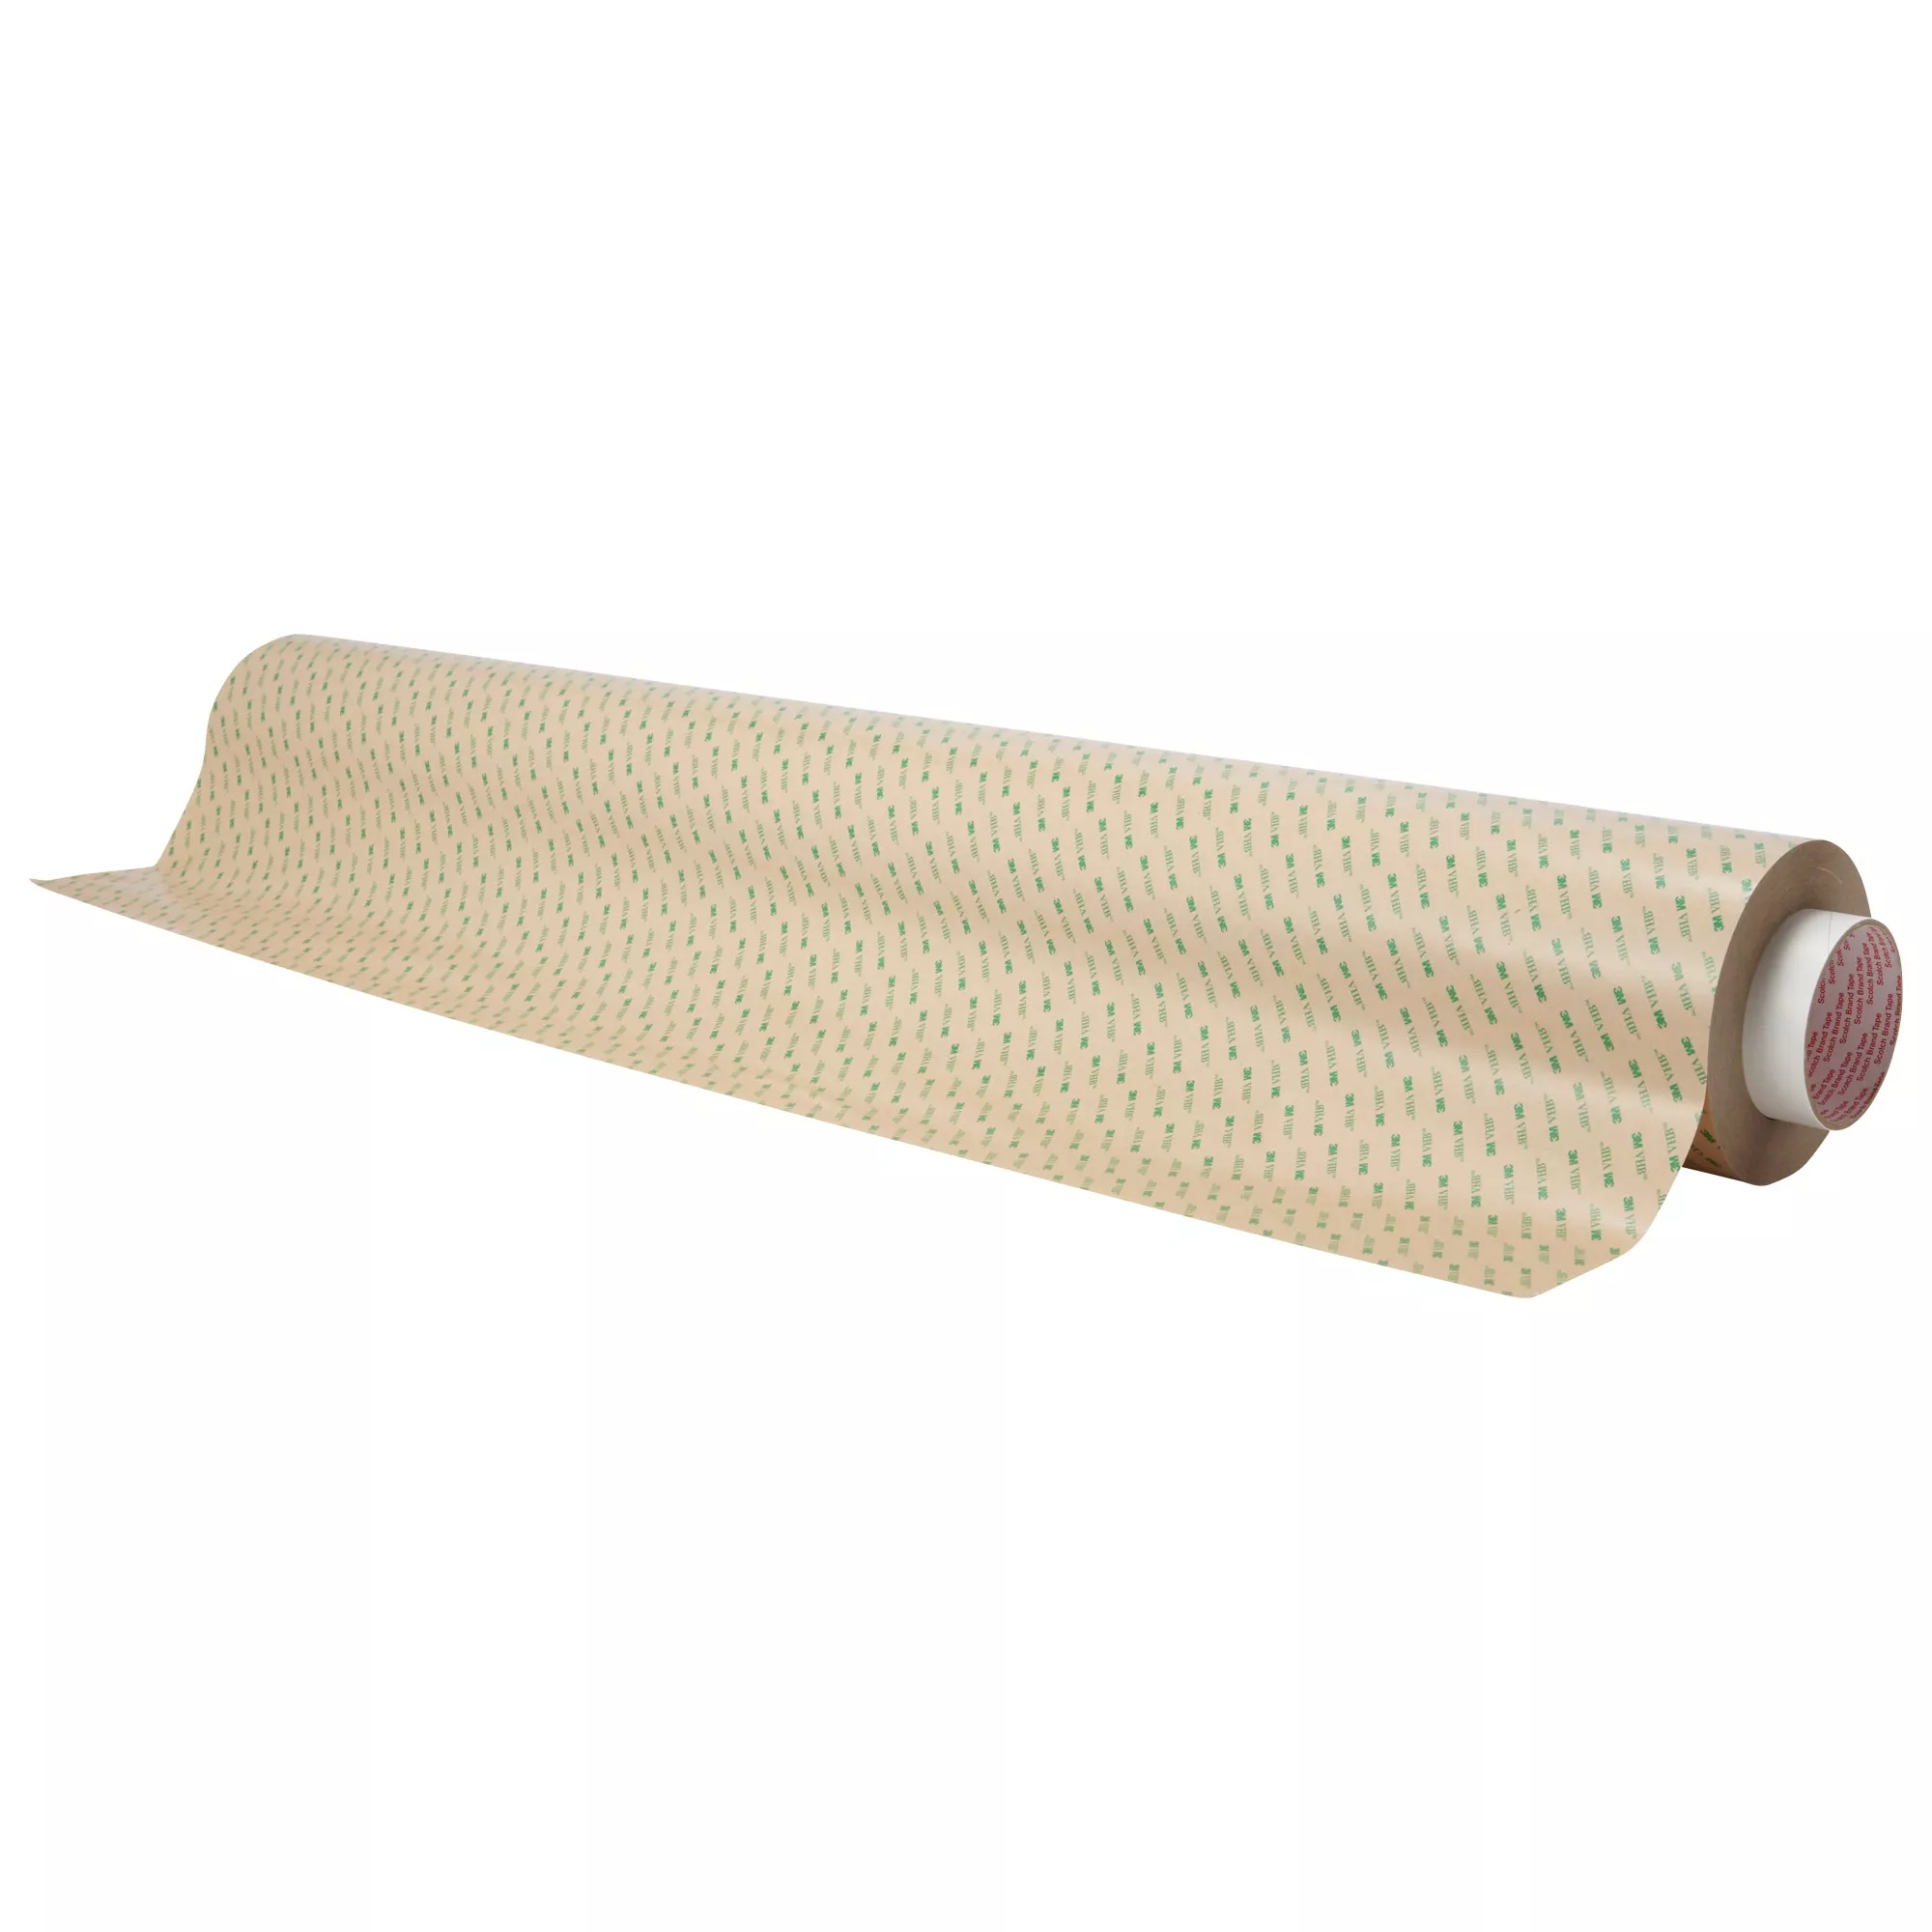 3M™ VHB™ Adhesive Transfer Tape F9460PC, Clear, 48 in x 60 yd, 2 mil, 1
Roll/Case